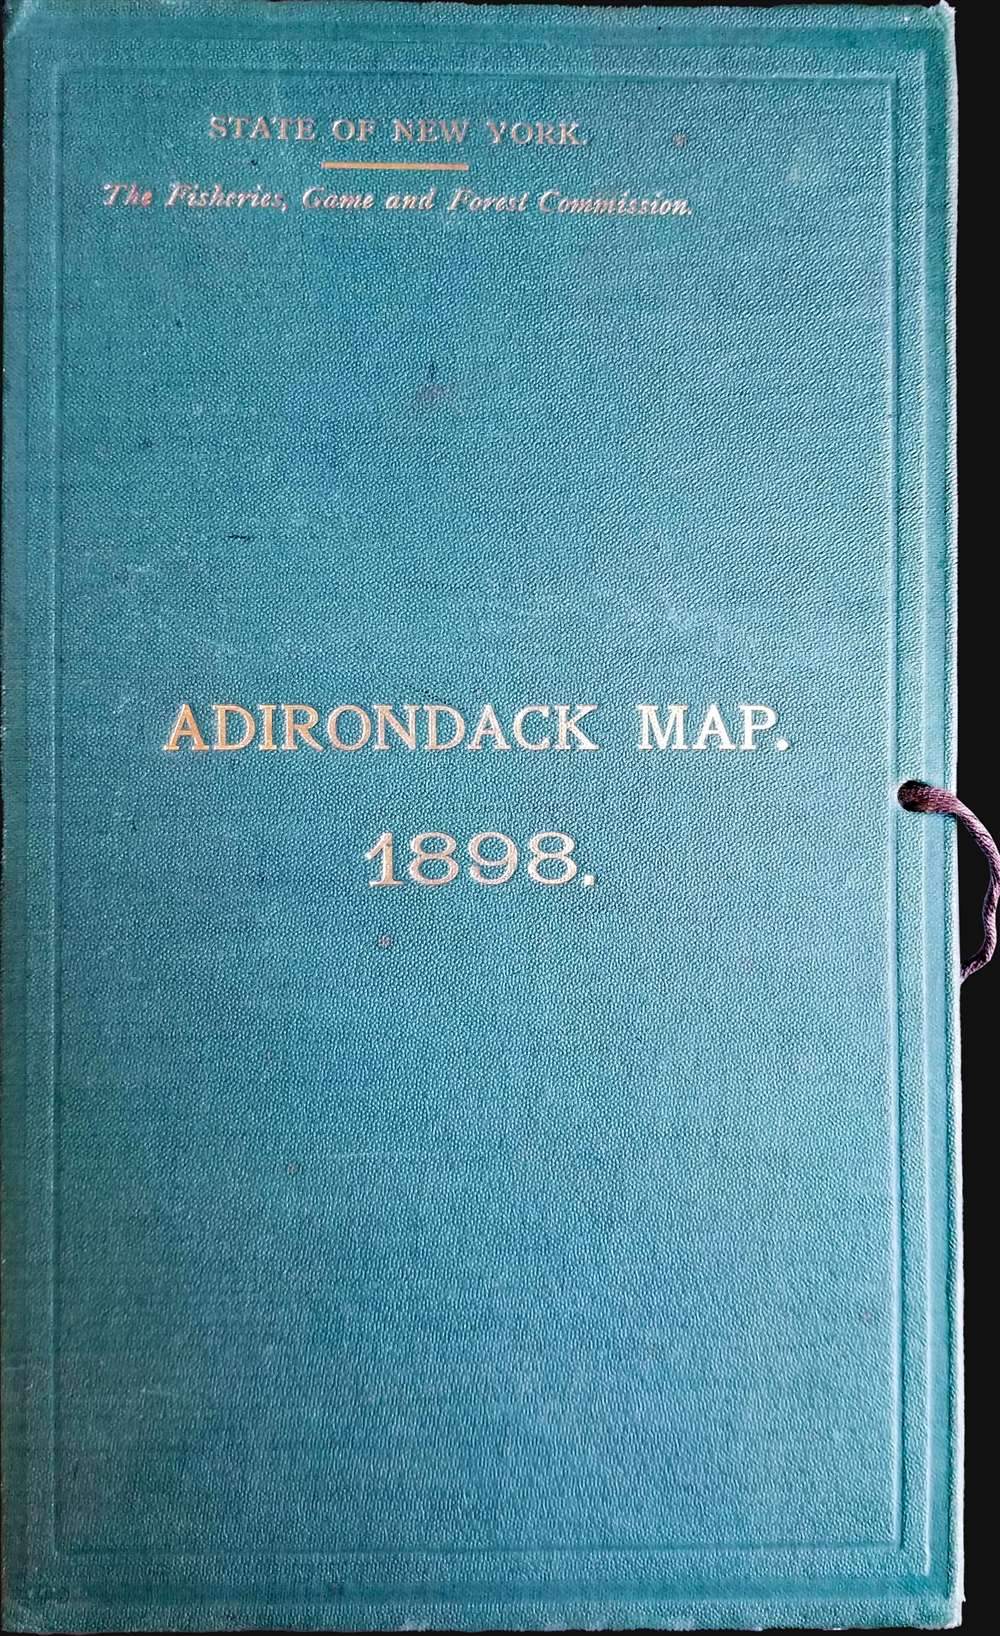 Map of the Adirondack Forest and Adjoining Territory Compiled from Official Maps and Field Notes on file in the State Departments at Albany, N.Y. - Alternate View 4